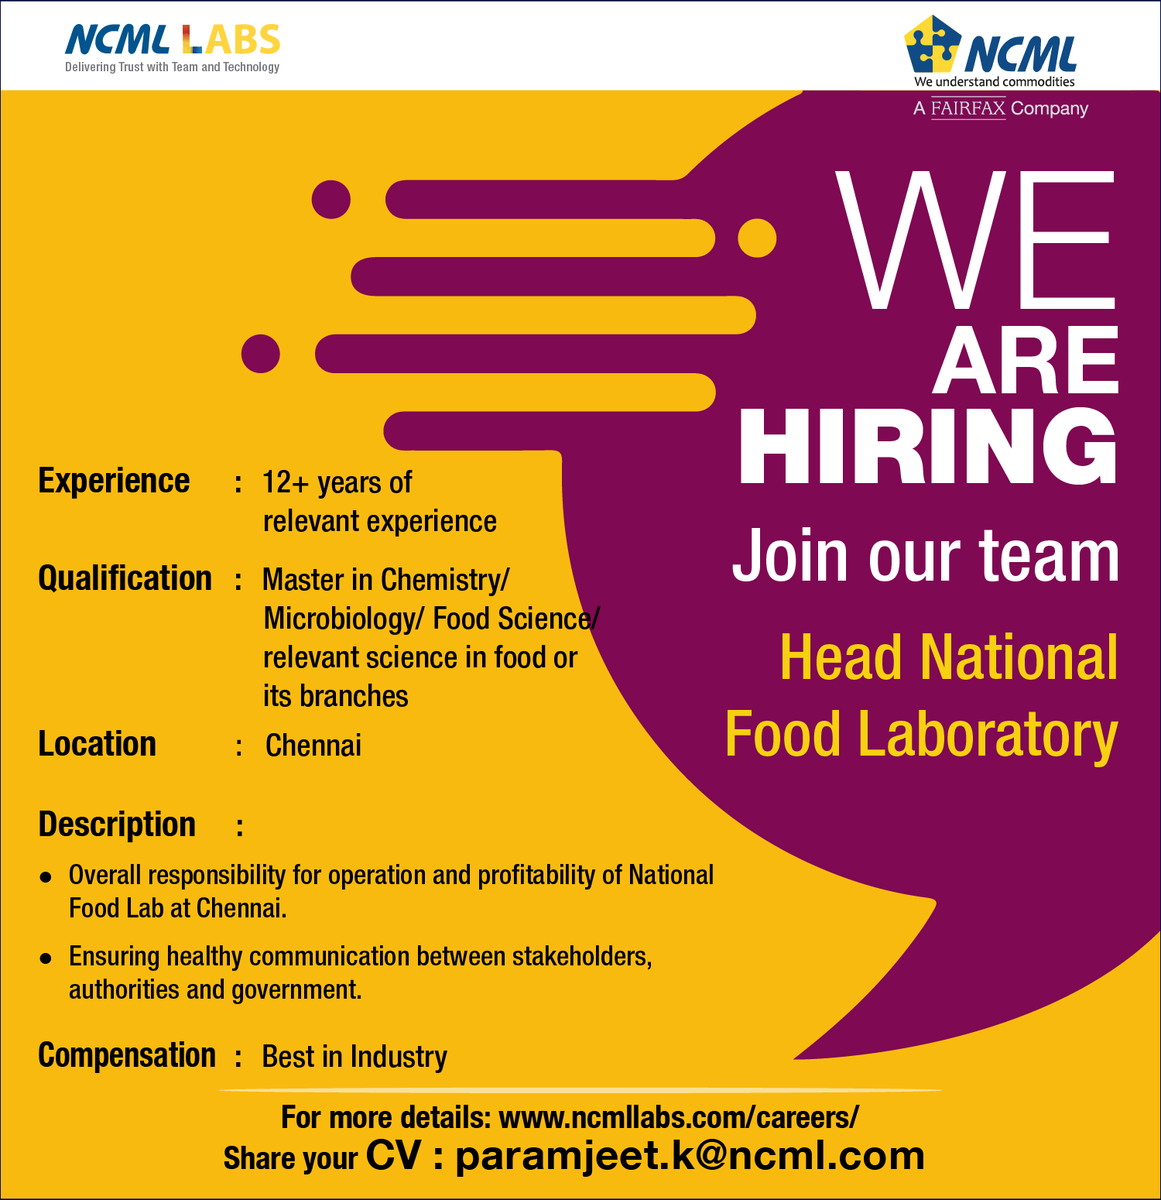 At #NCML We are #hiring for the post of #Headlab at #chennai.

#jobopening #immediatehiring #NCML #NCMLabs #chennaijobs #chennaihiring #foodindustryjobs #foodtesting   

@NCMLSocial 

Please visit: ncmllabs.com